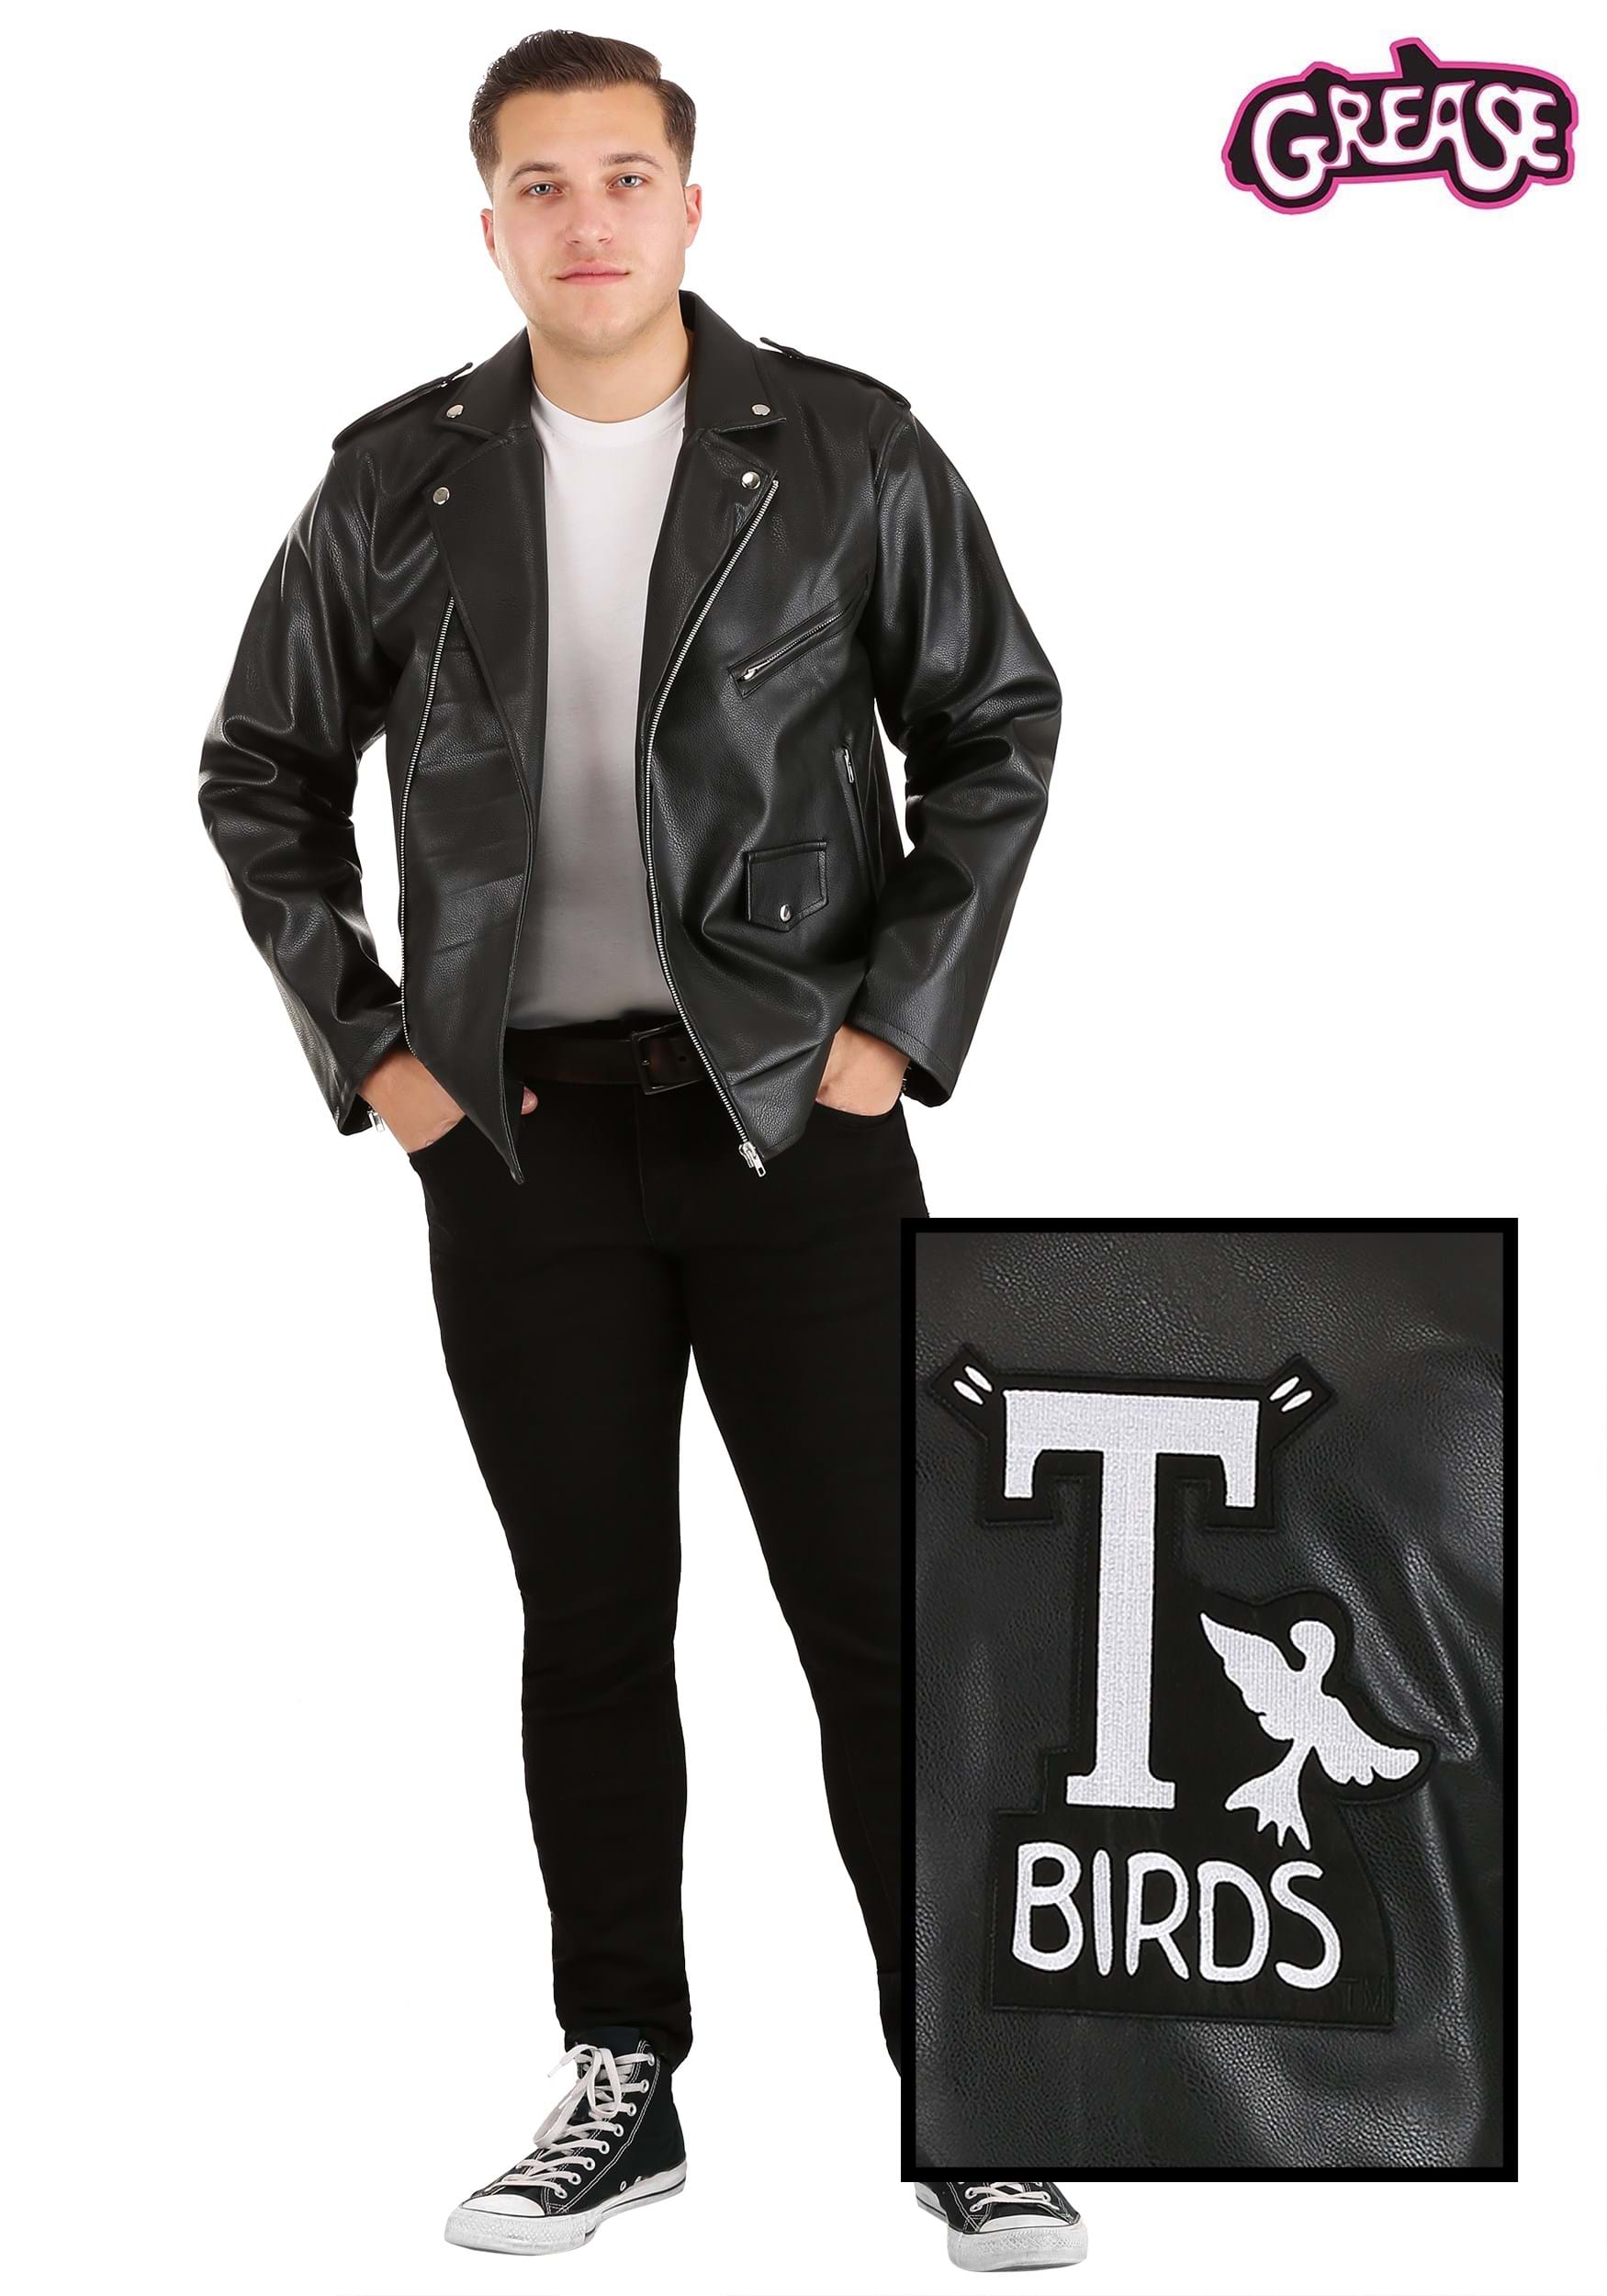 Adult Grease Authentic T-Birds Jacket Costume